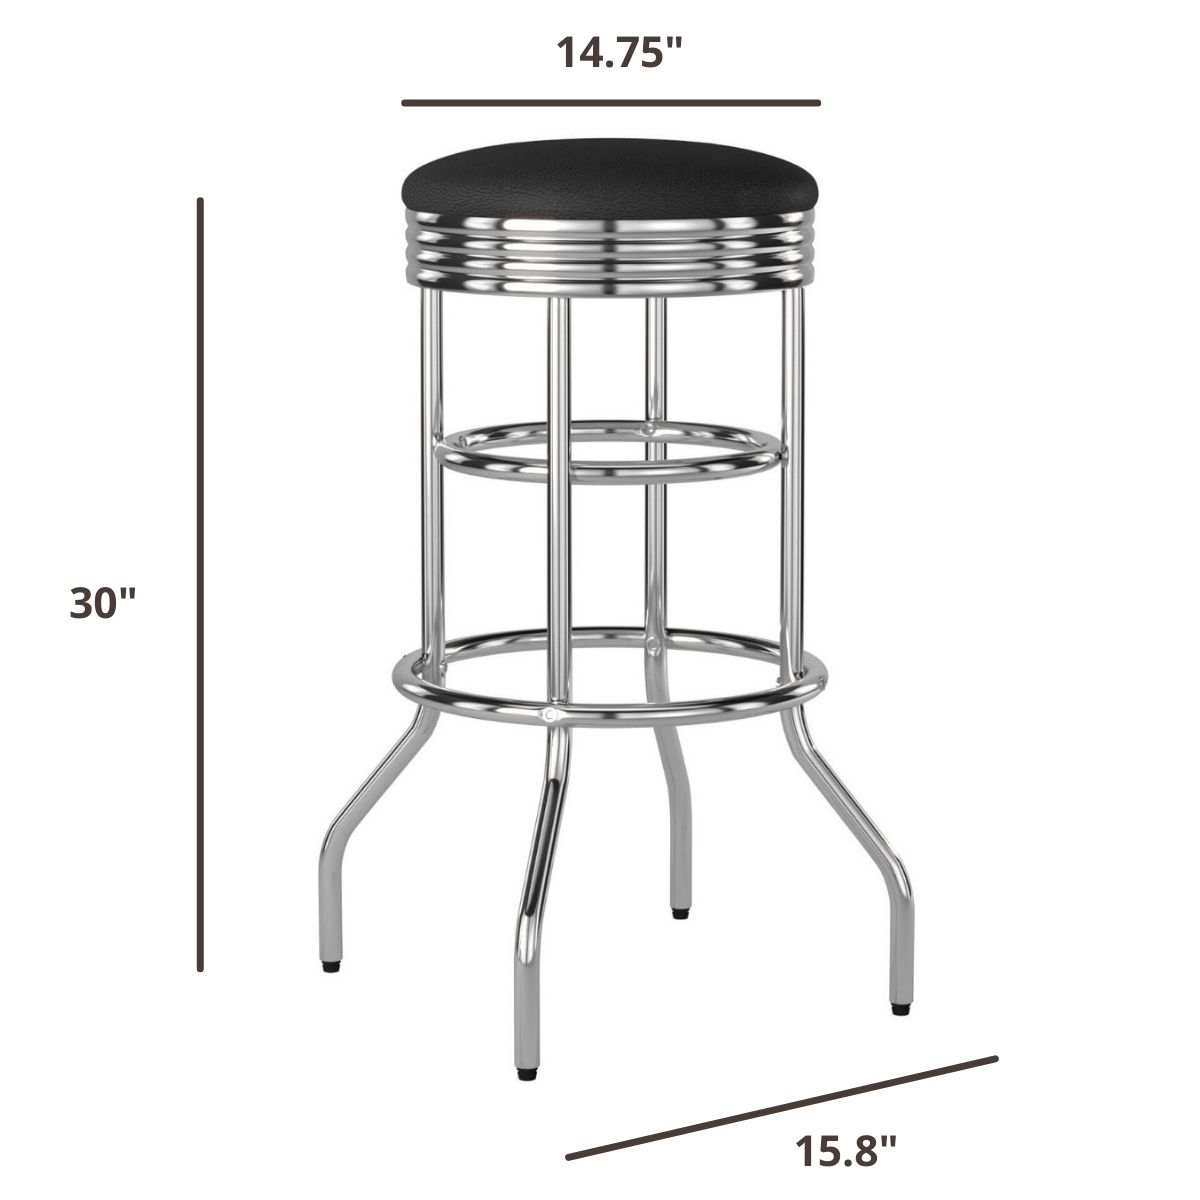 30 inches tall assembled stool with 14 inches seat